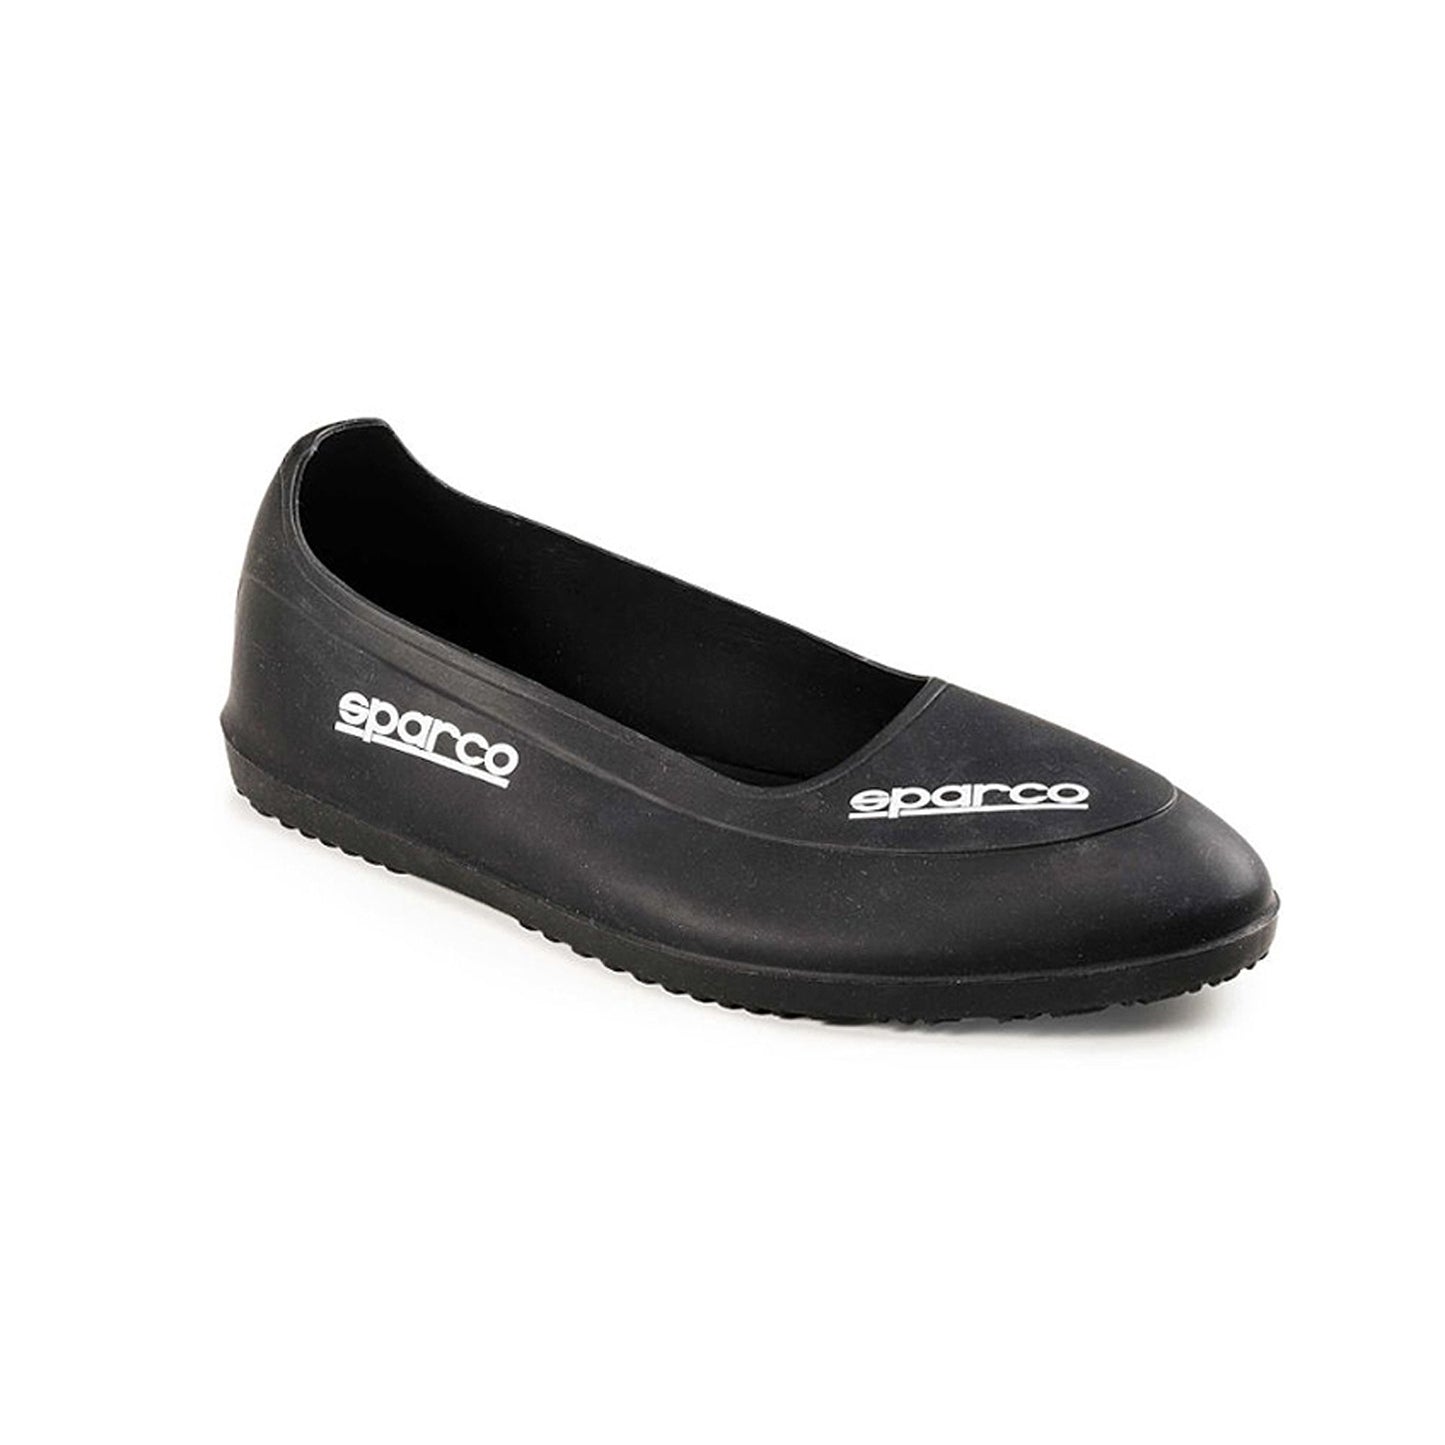 Sparco rain overshoes